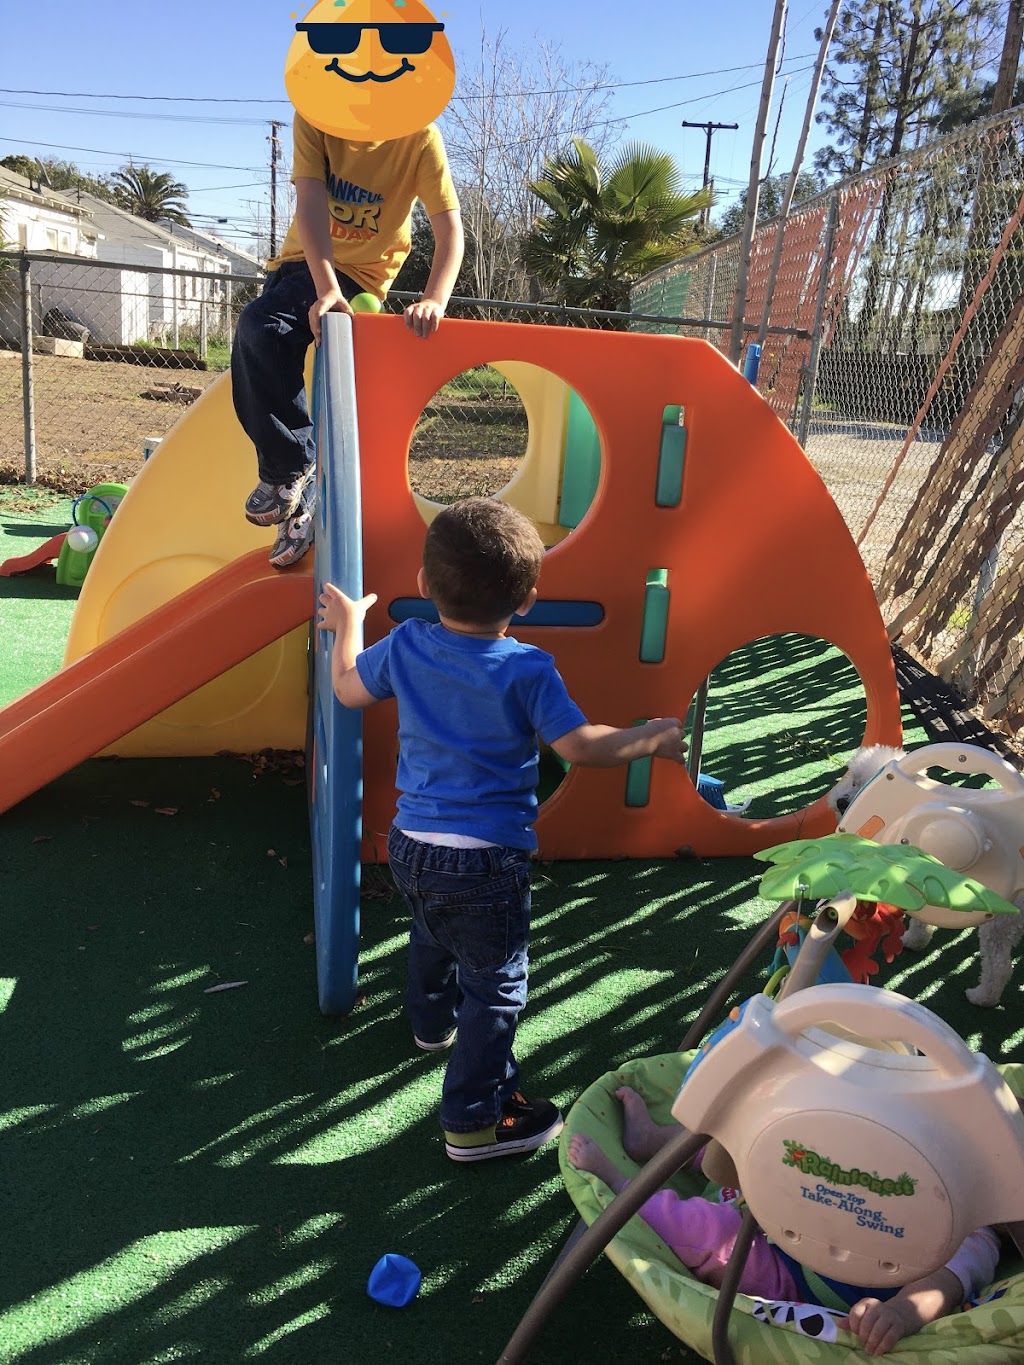 Orell’s DayCare | 945 W 13th St, Upland, CA 91786 | Phone: (760) 881-9062